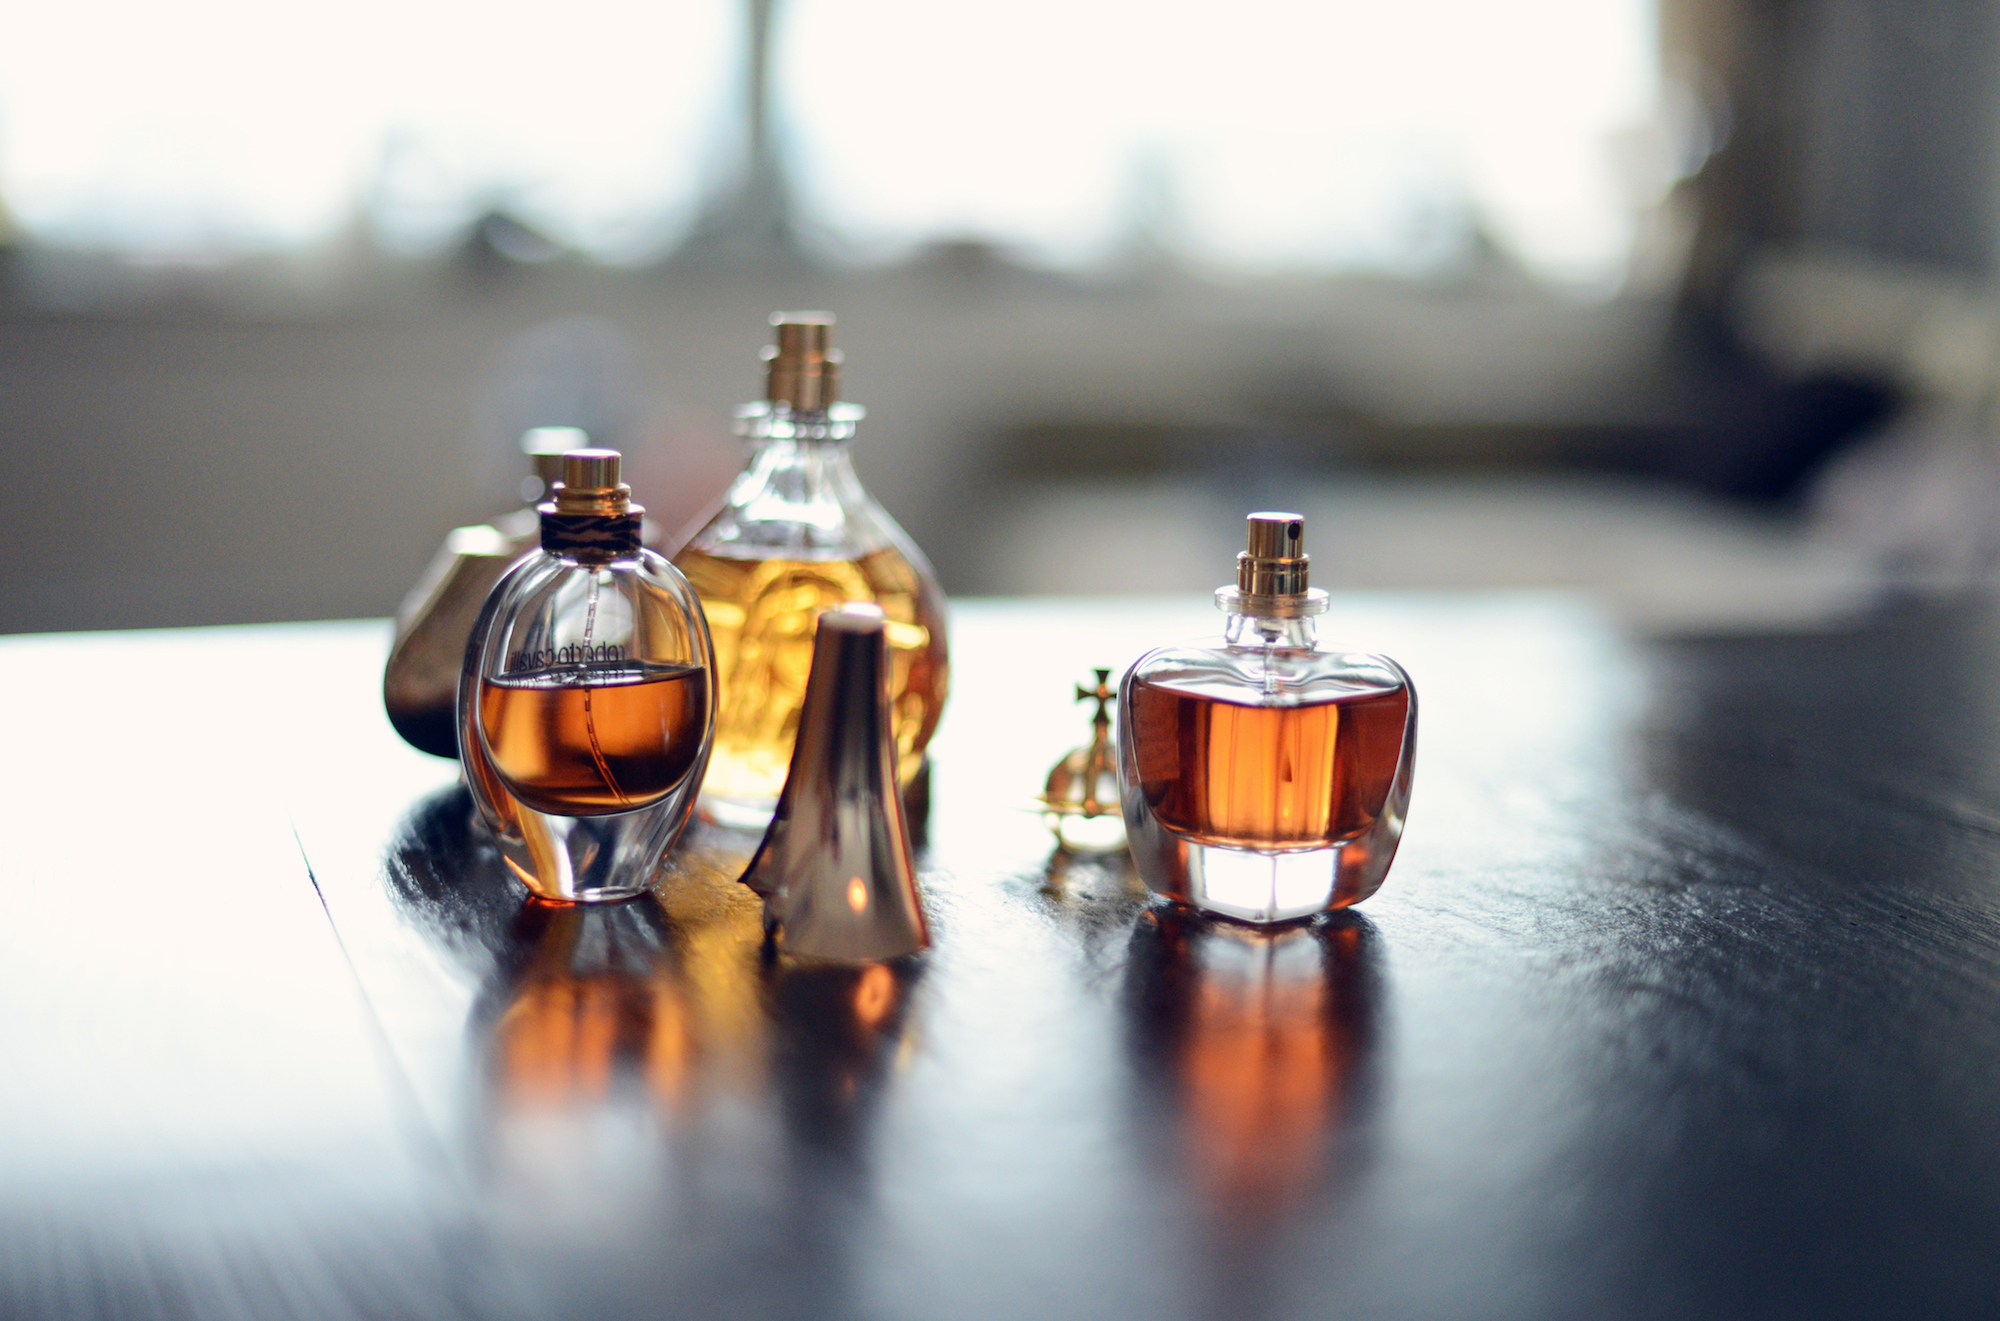 Four amber perfume bottles on a table